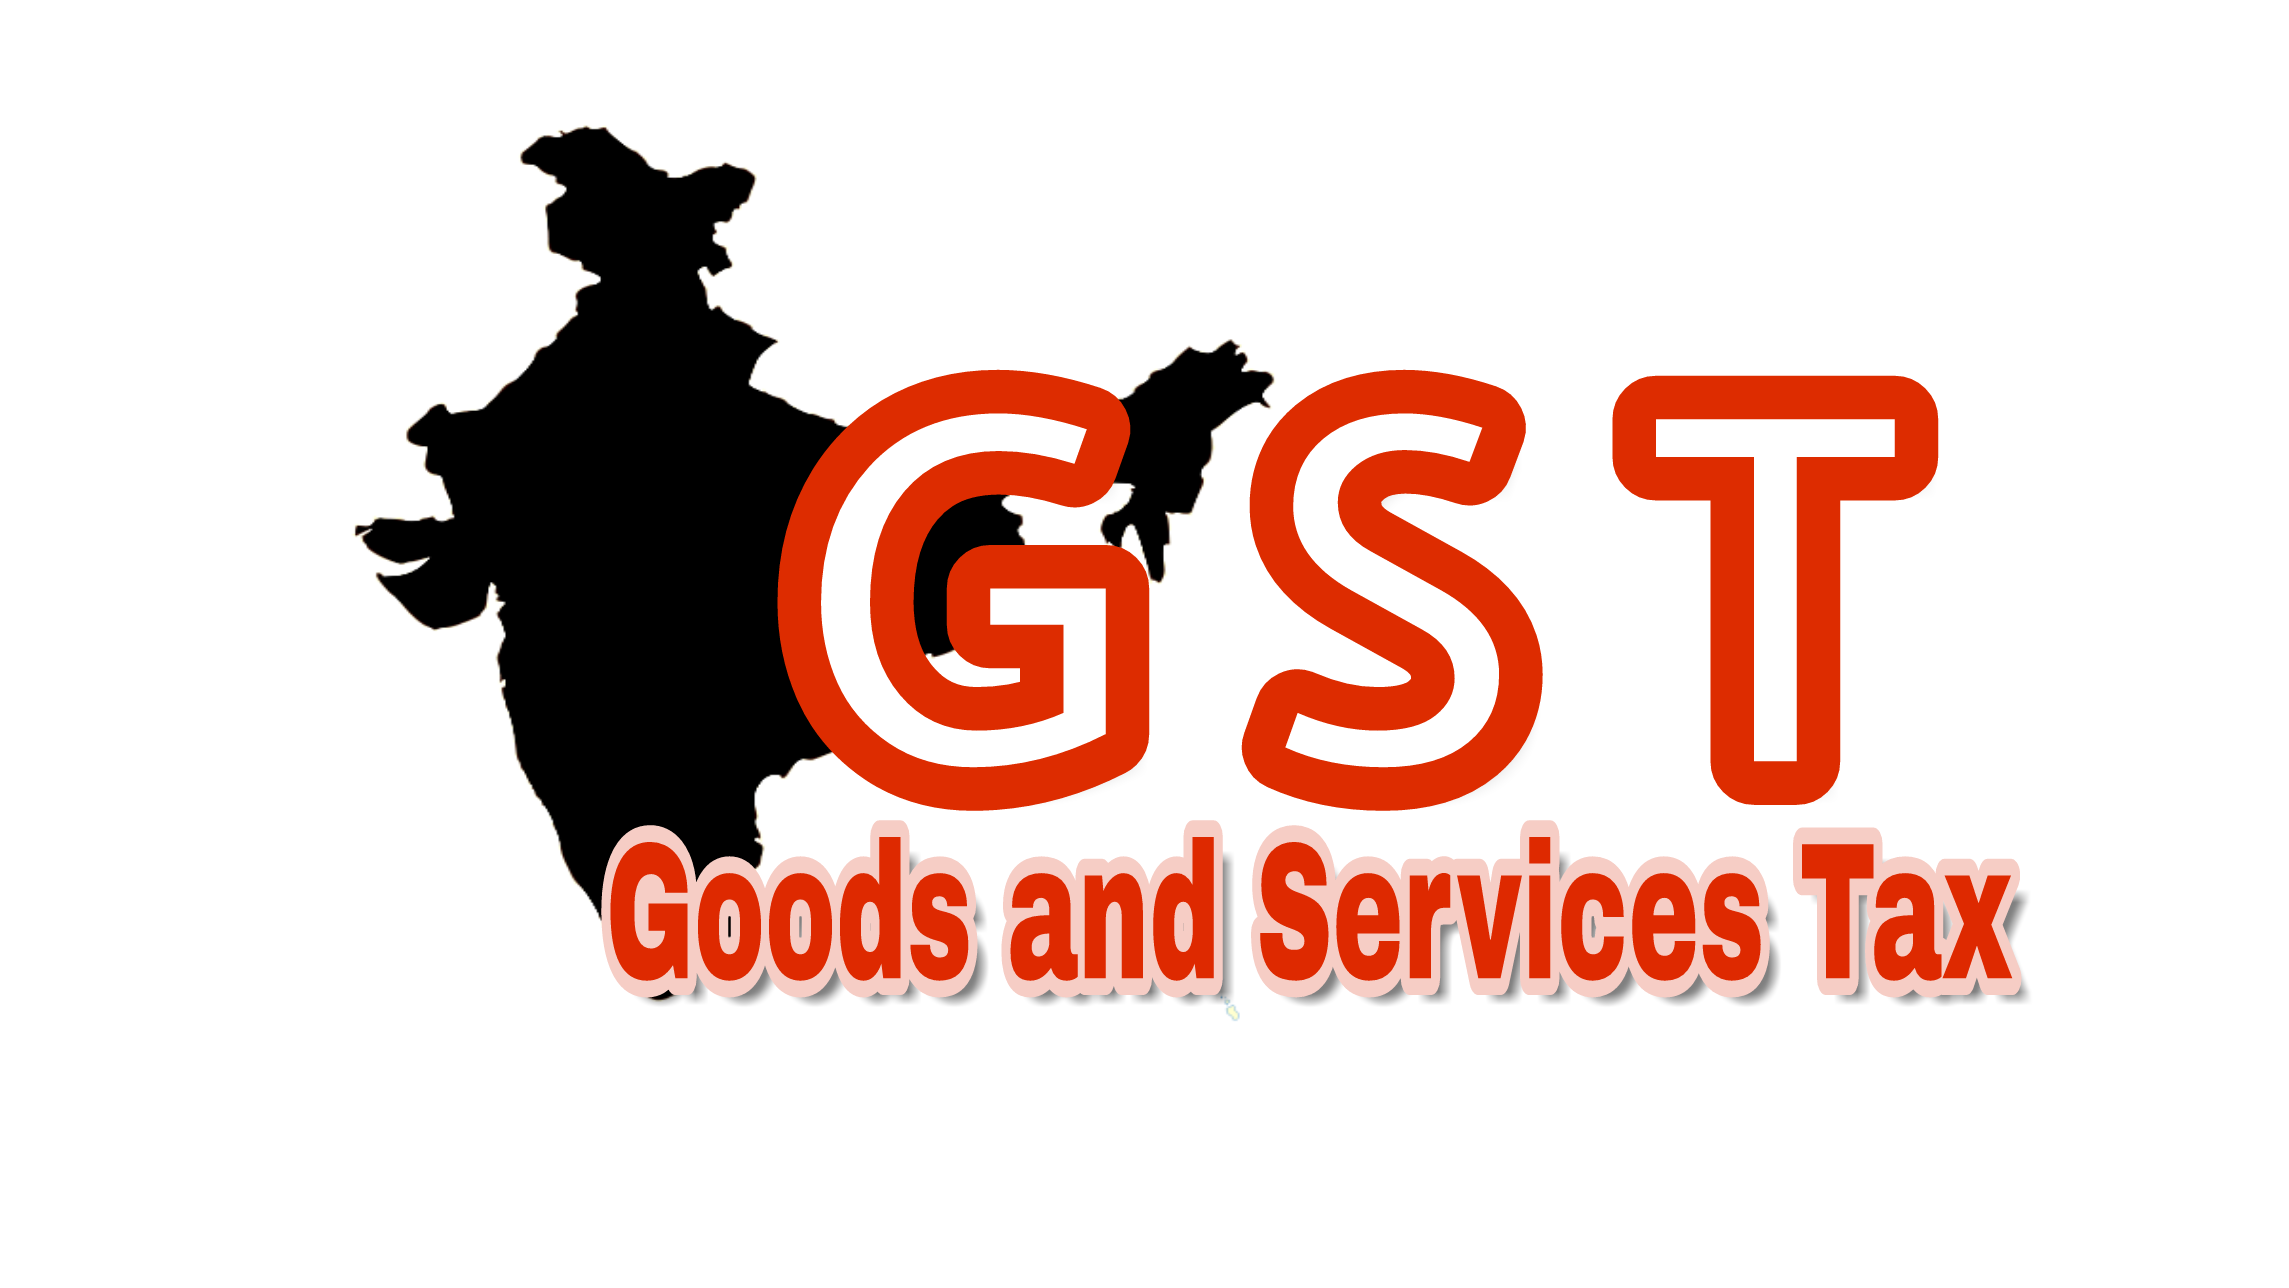 history-of-service-tax-rates-in-india GST